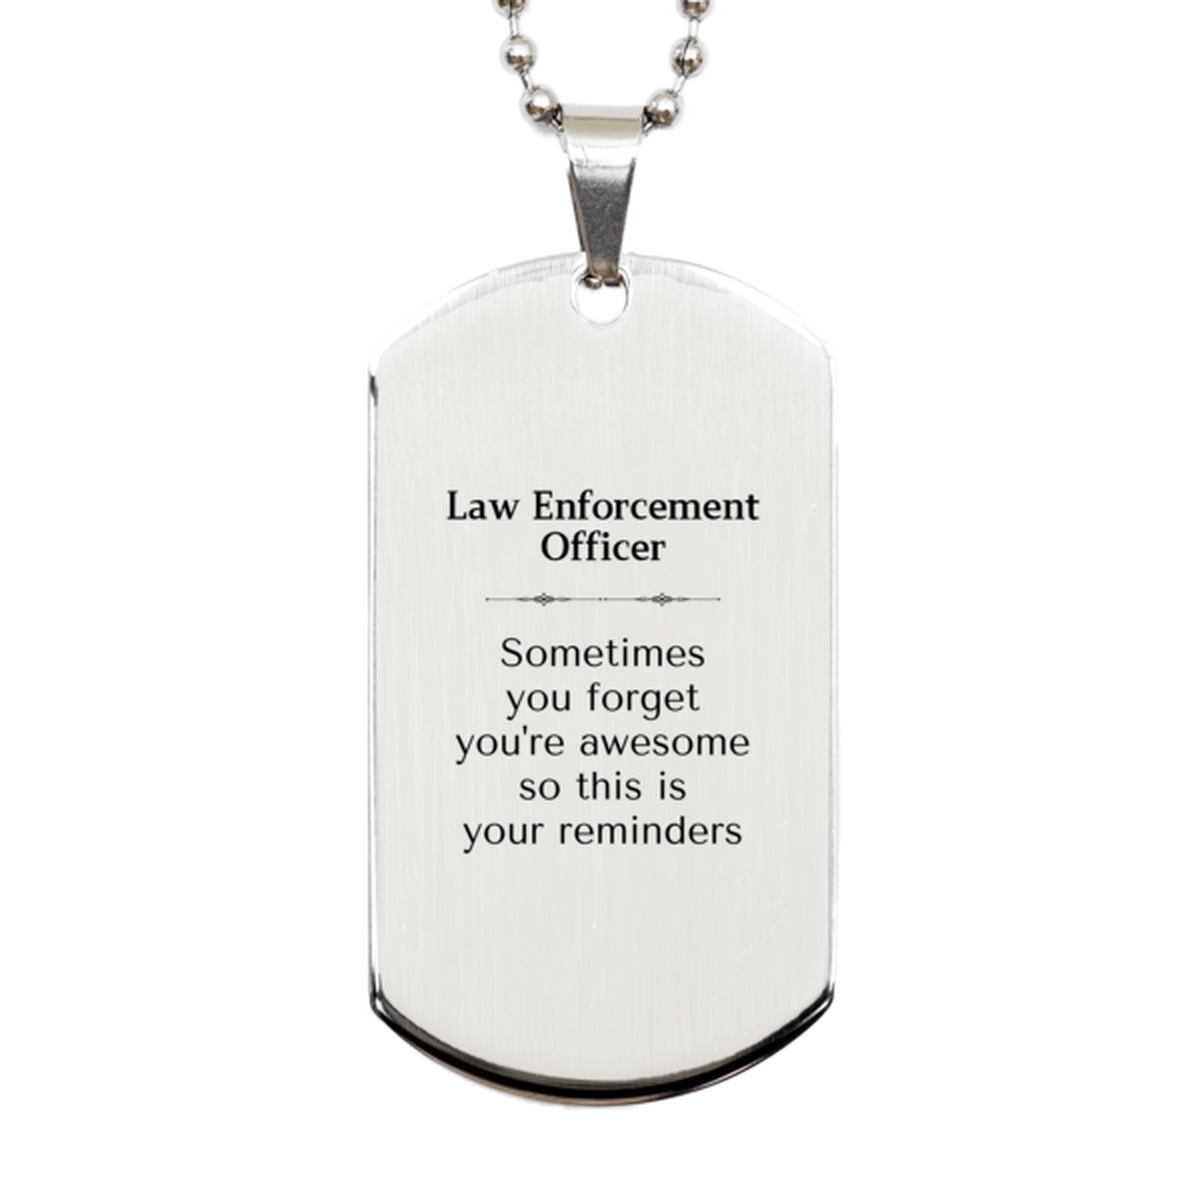 Sentimental Law Enforcement Officer Silver Dog Tag, Law Enforcement Officer Sometimes you forget you're awesome so this is your reminders, Graduation Christmas Birthday Gifts for Law Enforcement Officer, Men, Women, Coworkers